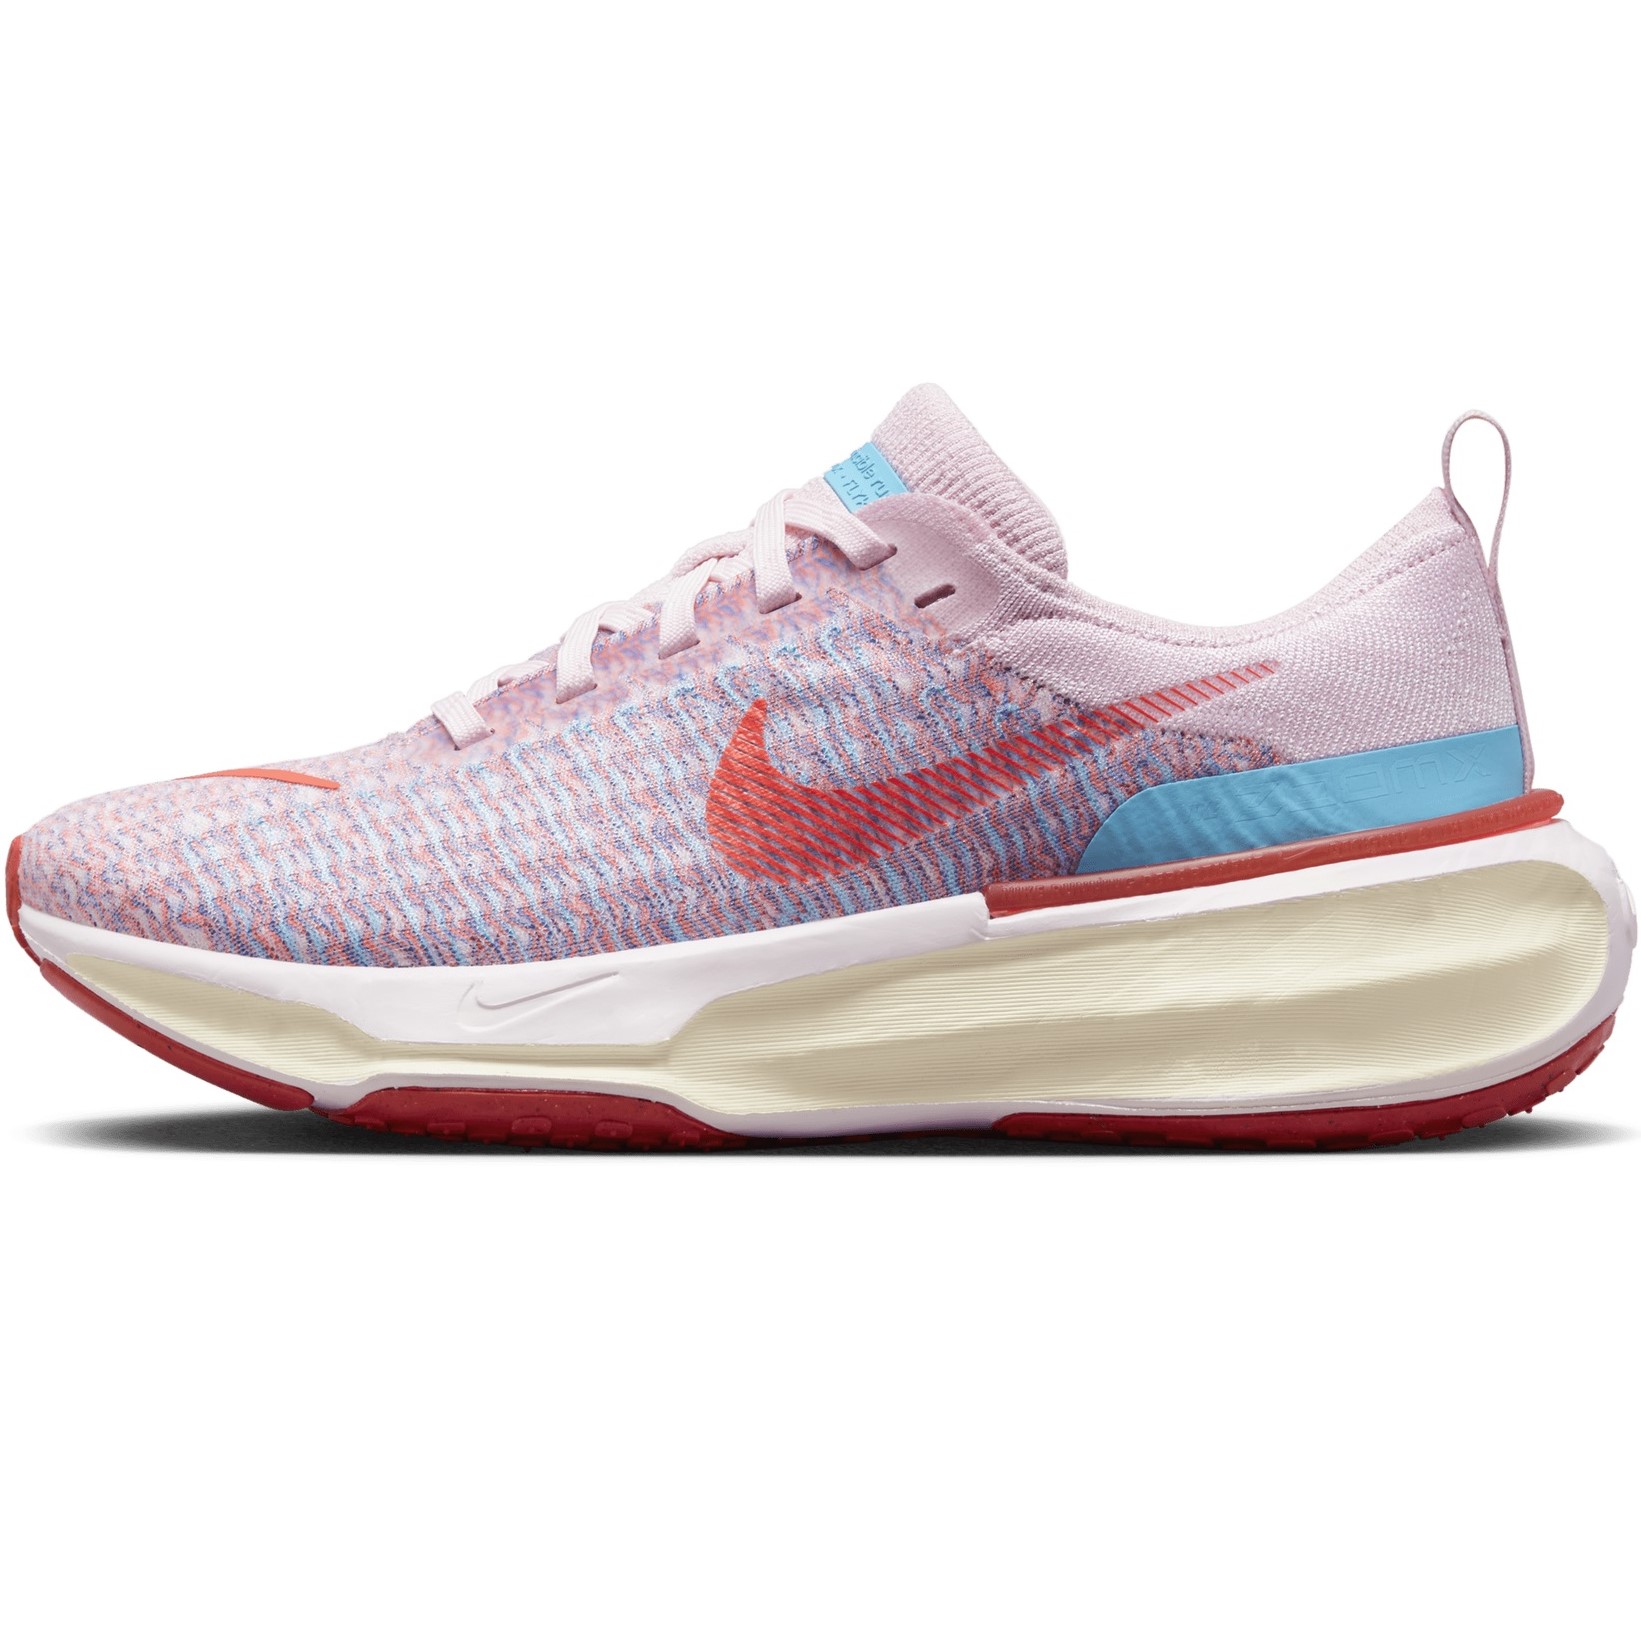 GIÀY CHẠY BỘ NIKE NỮ WOMENS ZOOMX INVINCIBLE 3 ROAD RUNNING SHOES PINK FOAM RACER BLUE DR2660-600 9